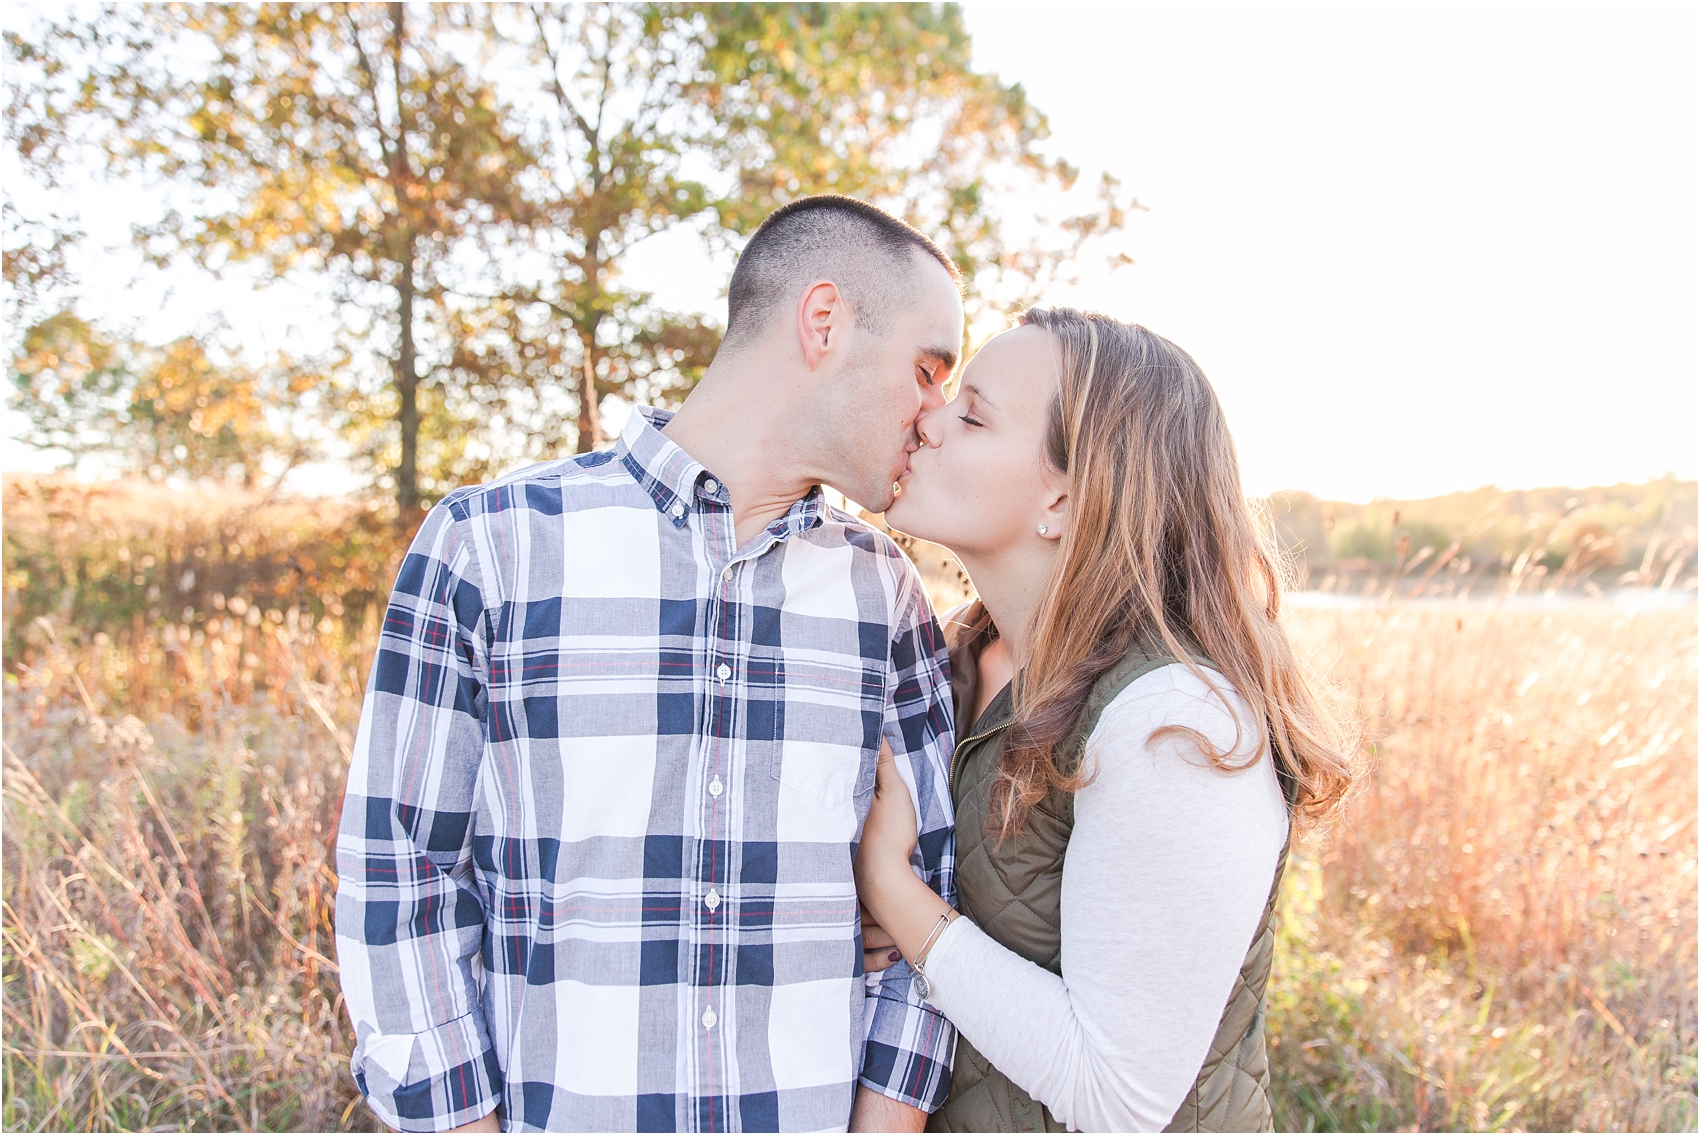 romantic-fall-engagement-photos-at-indian-springs-metropark-in-clarkston-mi-by-courtney-carolyn-photography_0018.jpg